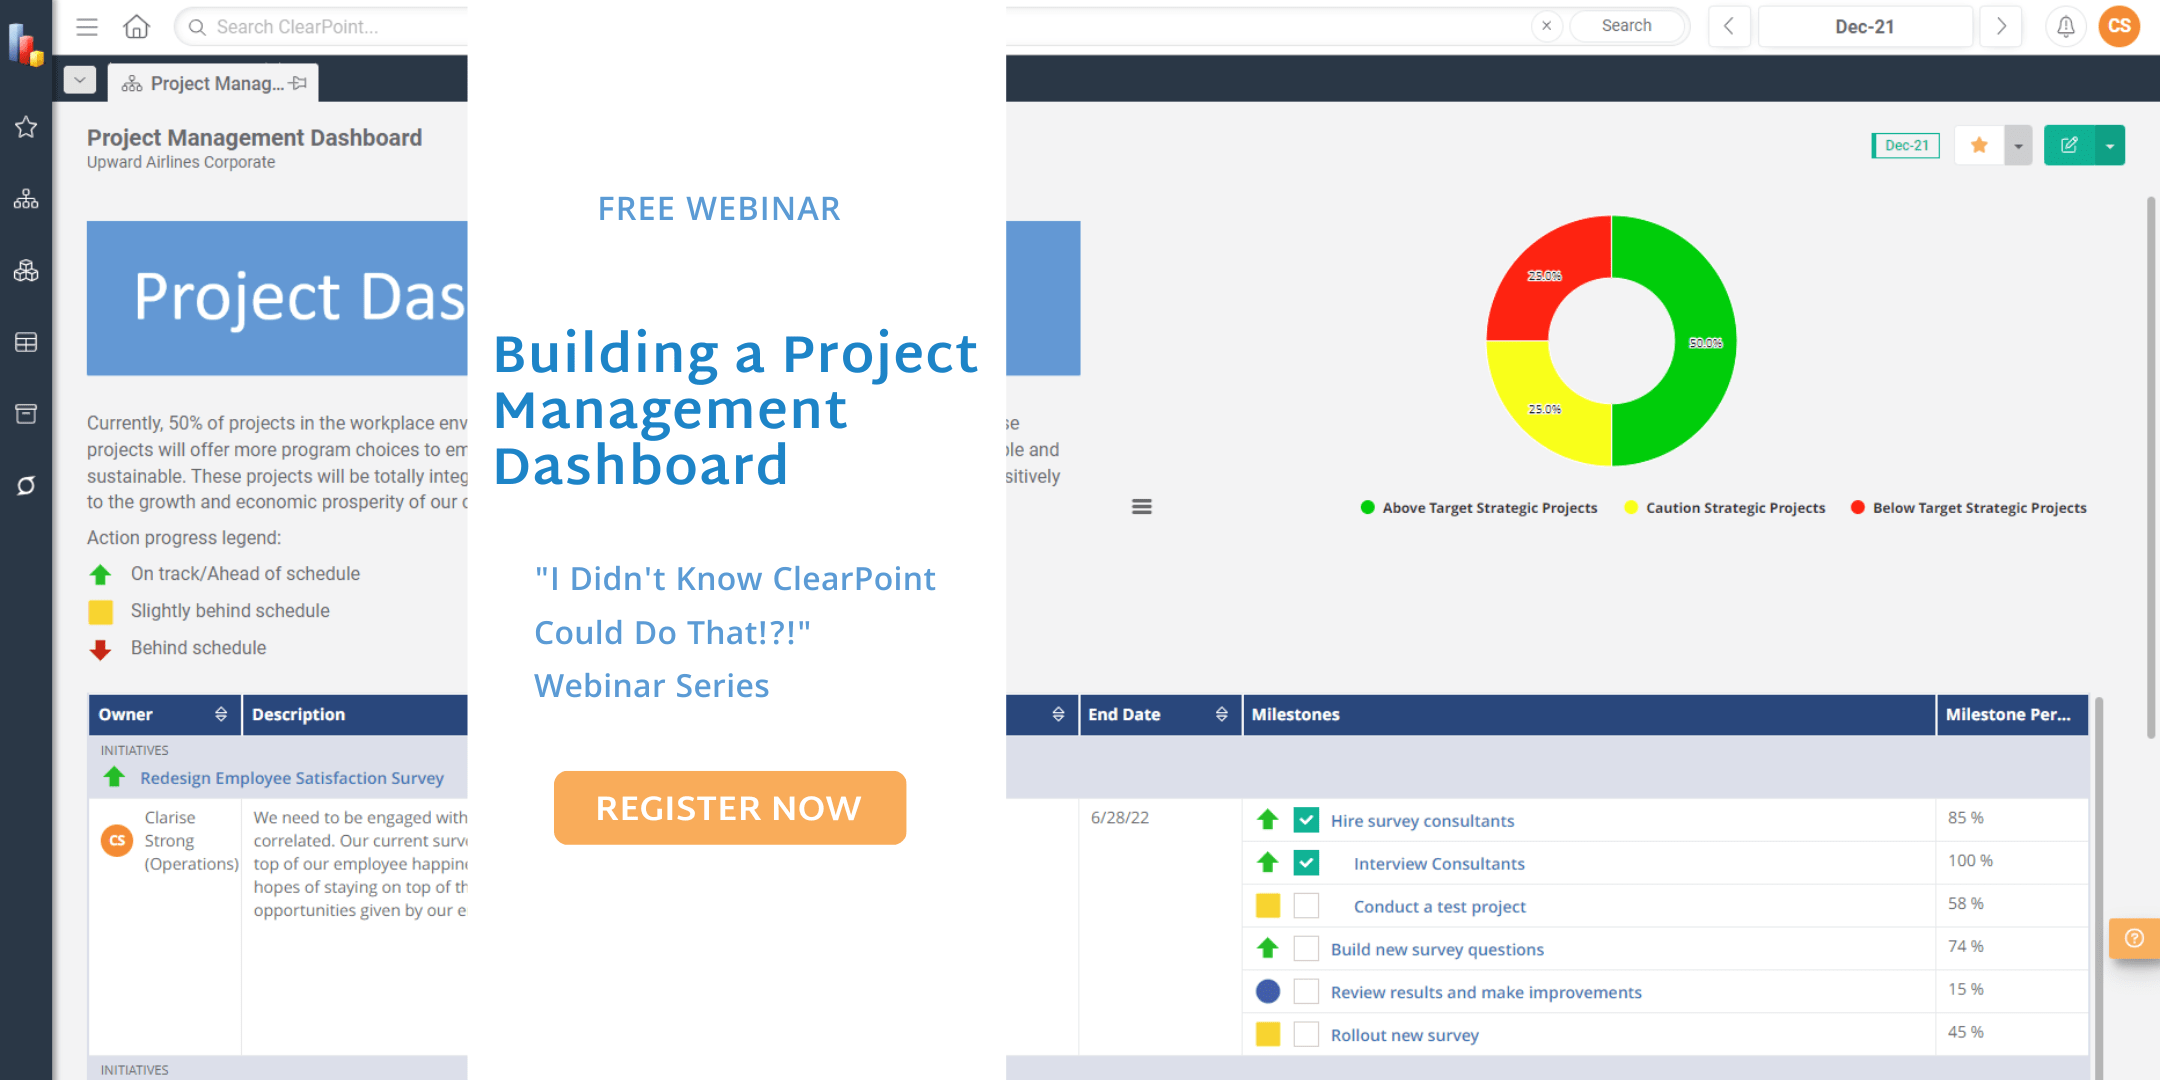 Building a Project Management Dashboard in ClearPoint